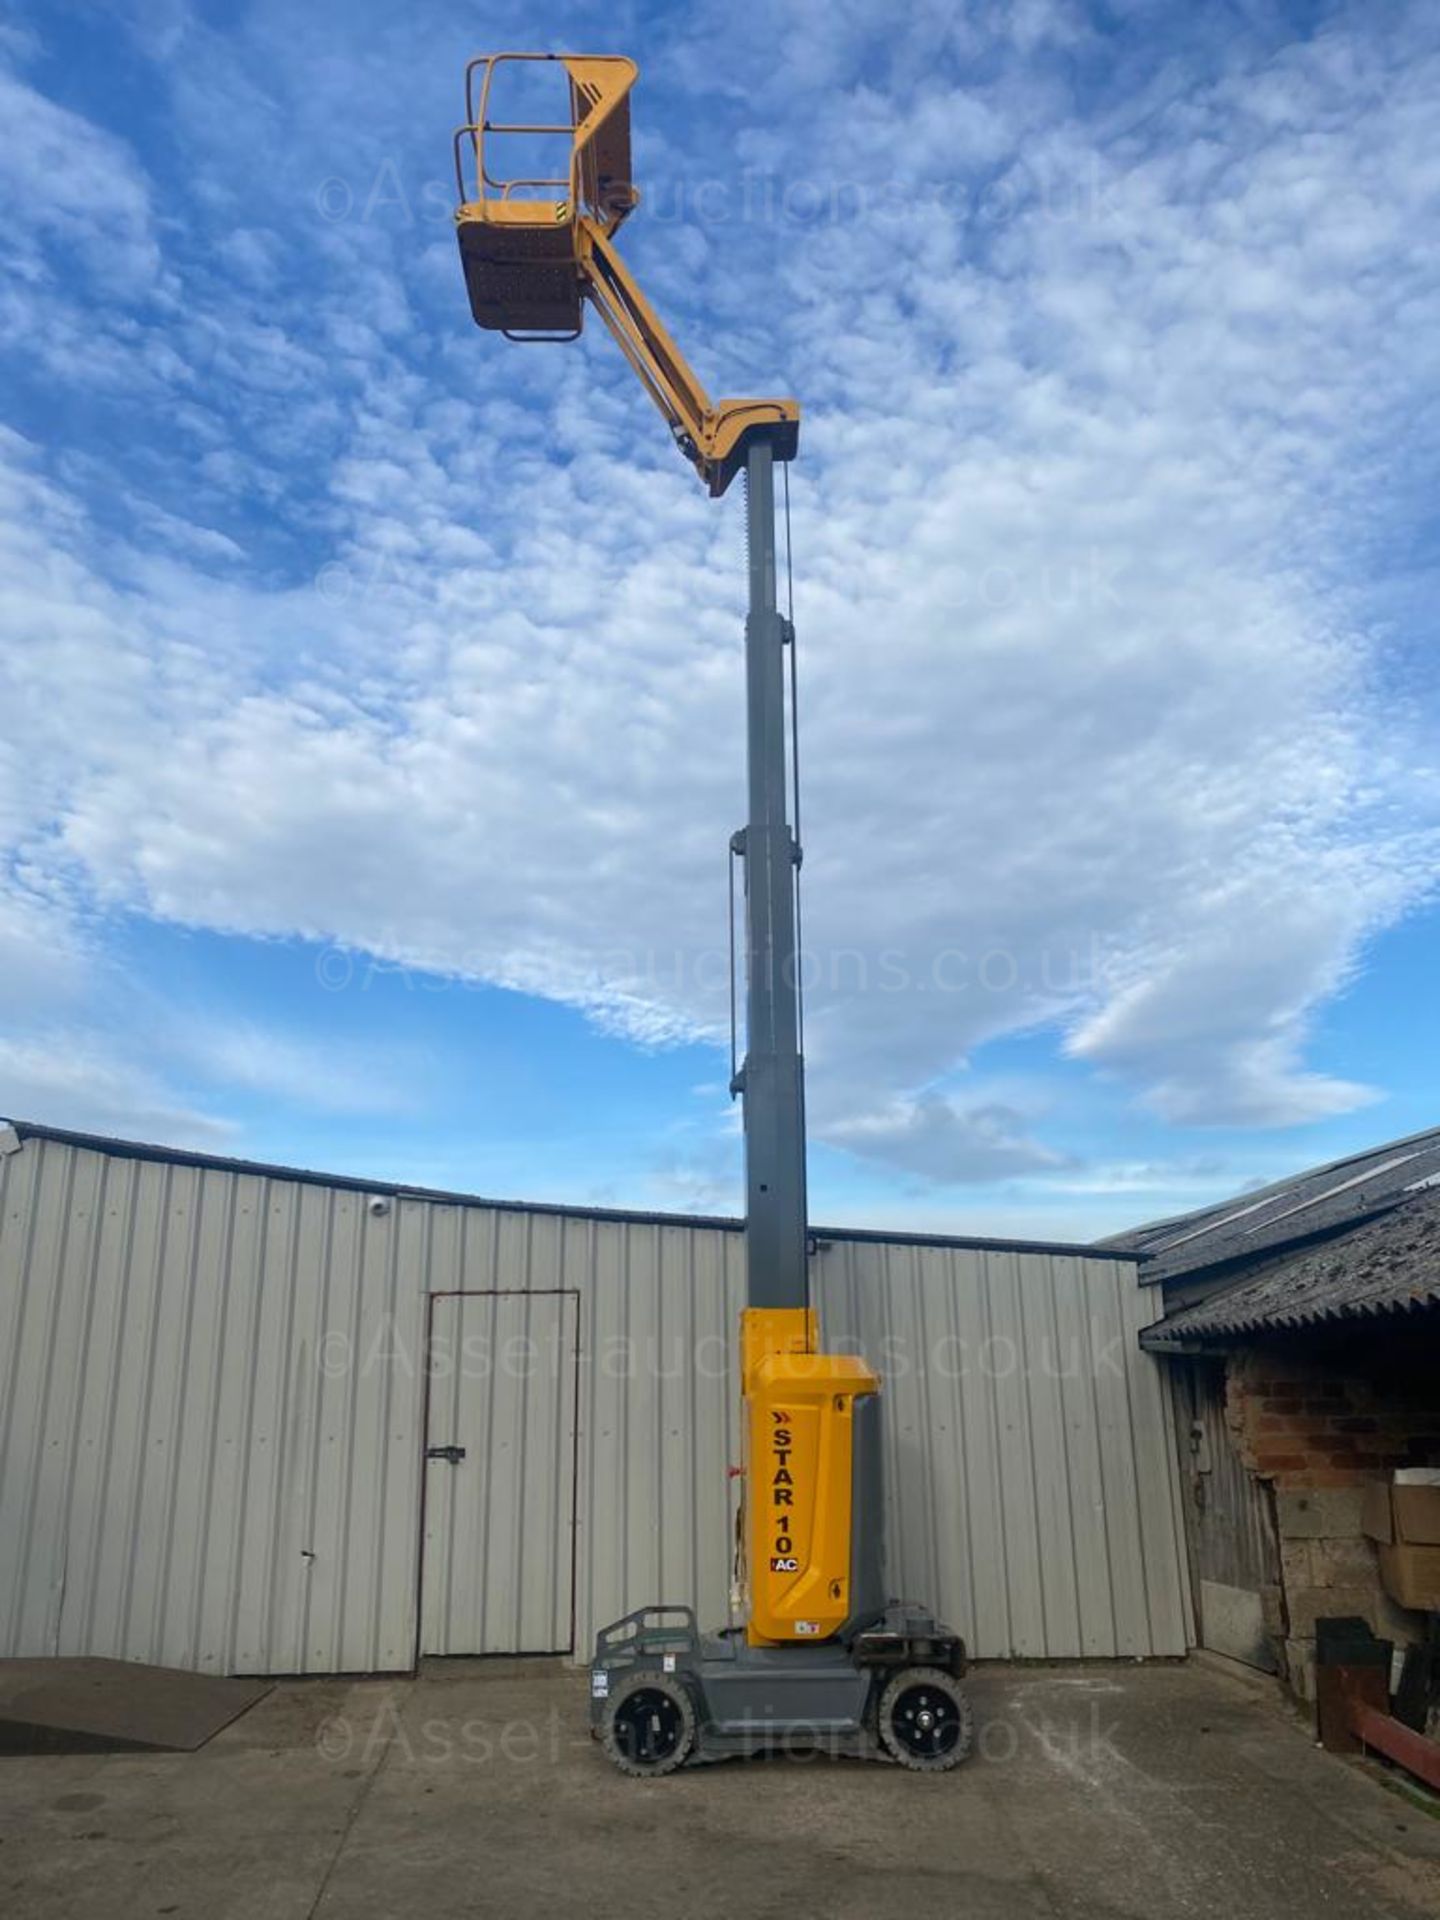 ACCESS PLATFORM HAULOTTE STAR 10, WORKING HEIGHT 10M, ONLY 91 HOURS, YEAR 2019 *PLUS VAT* - Image 2 of 8